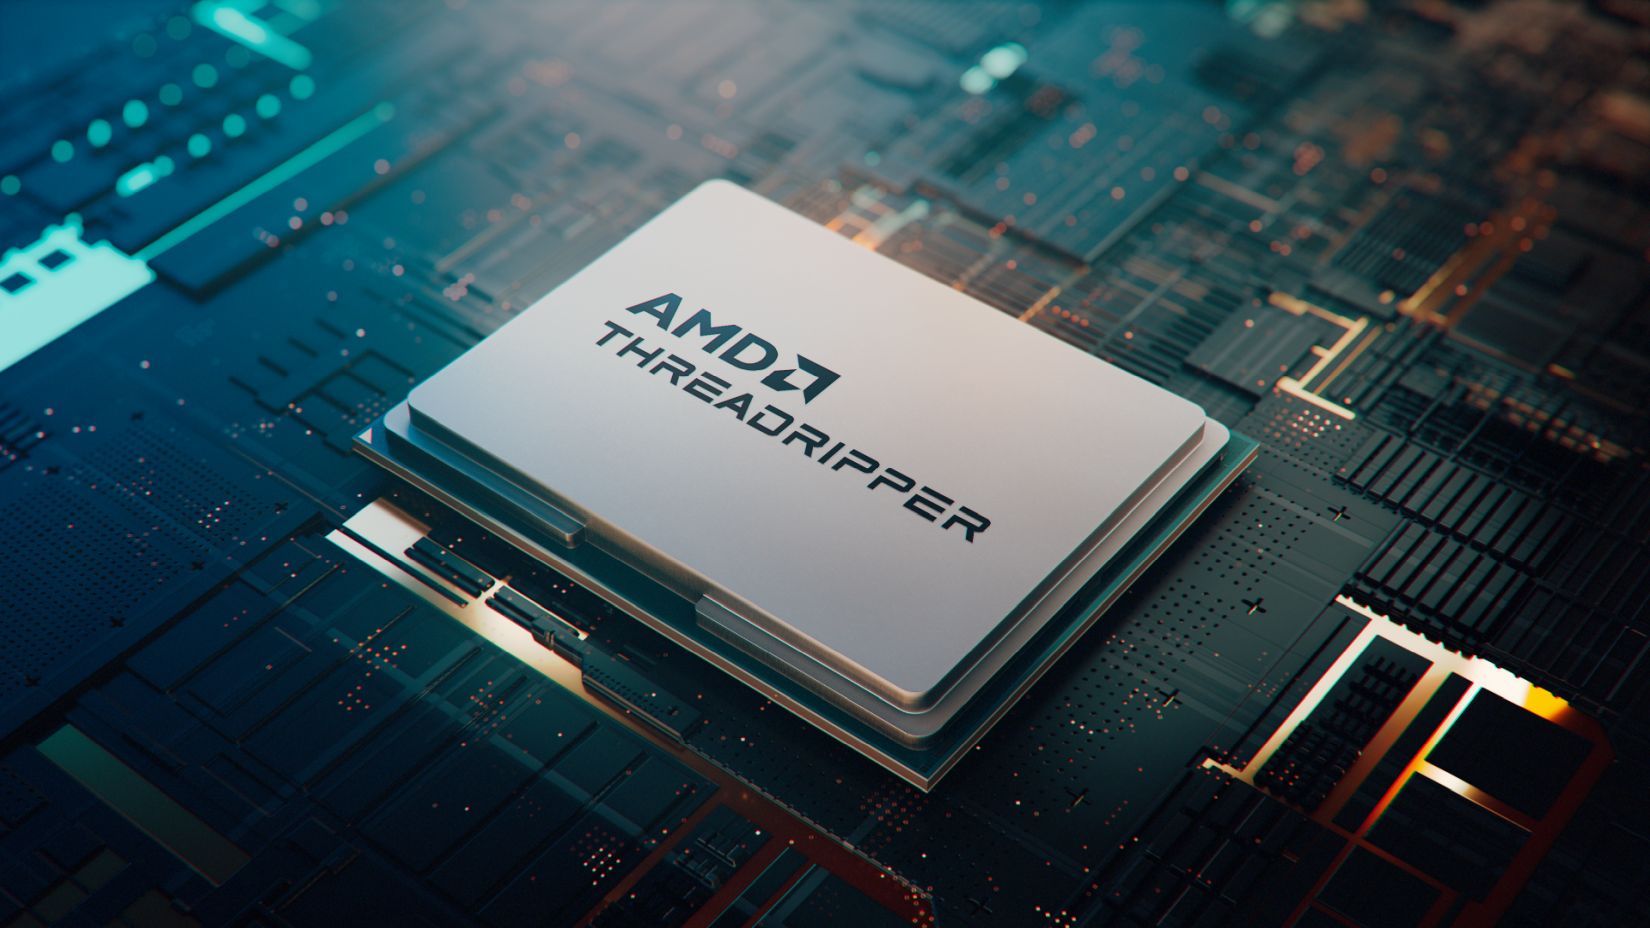  AMD brings Threadripper back to the desktop with a new non-Pro range of monster chips... that I'm going to now call Wallet-ripper 